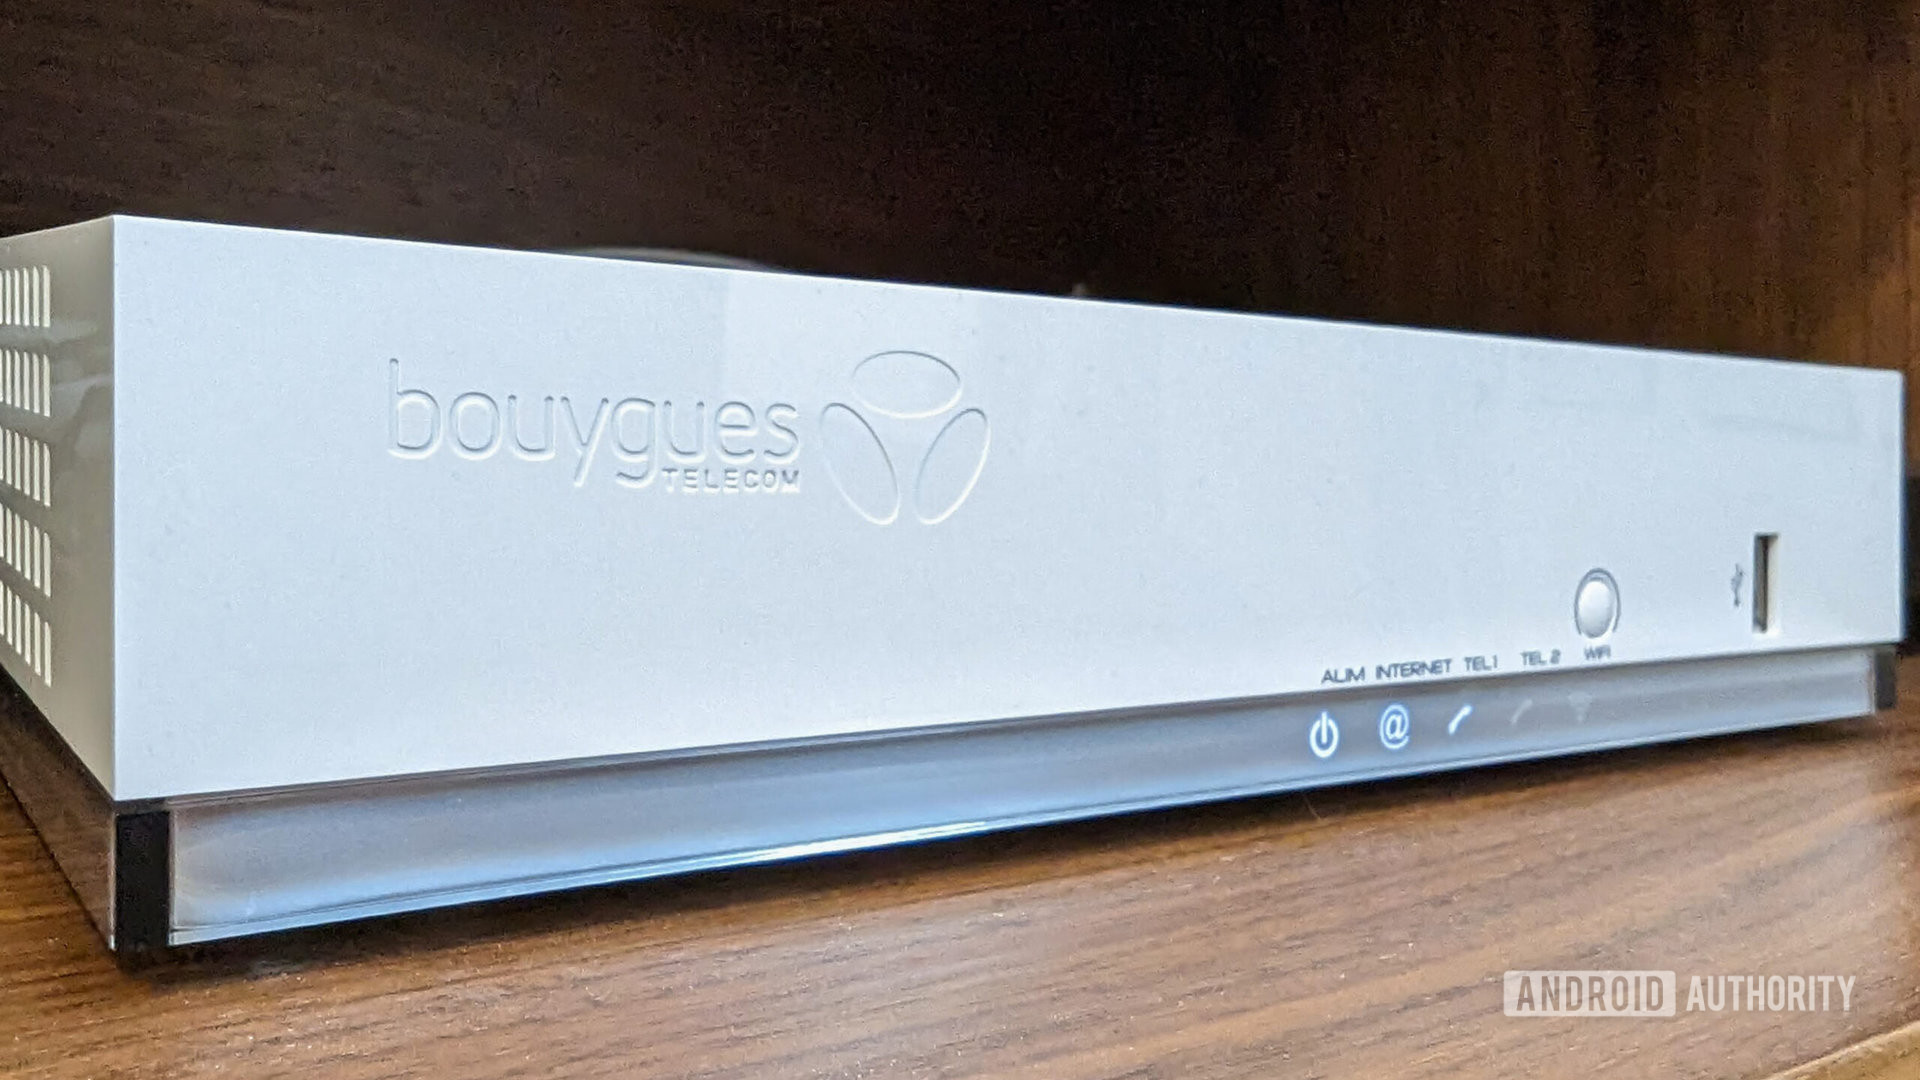 Bouygues BBox router, seen from the front